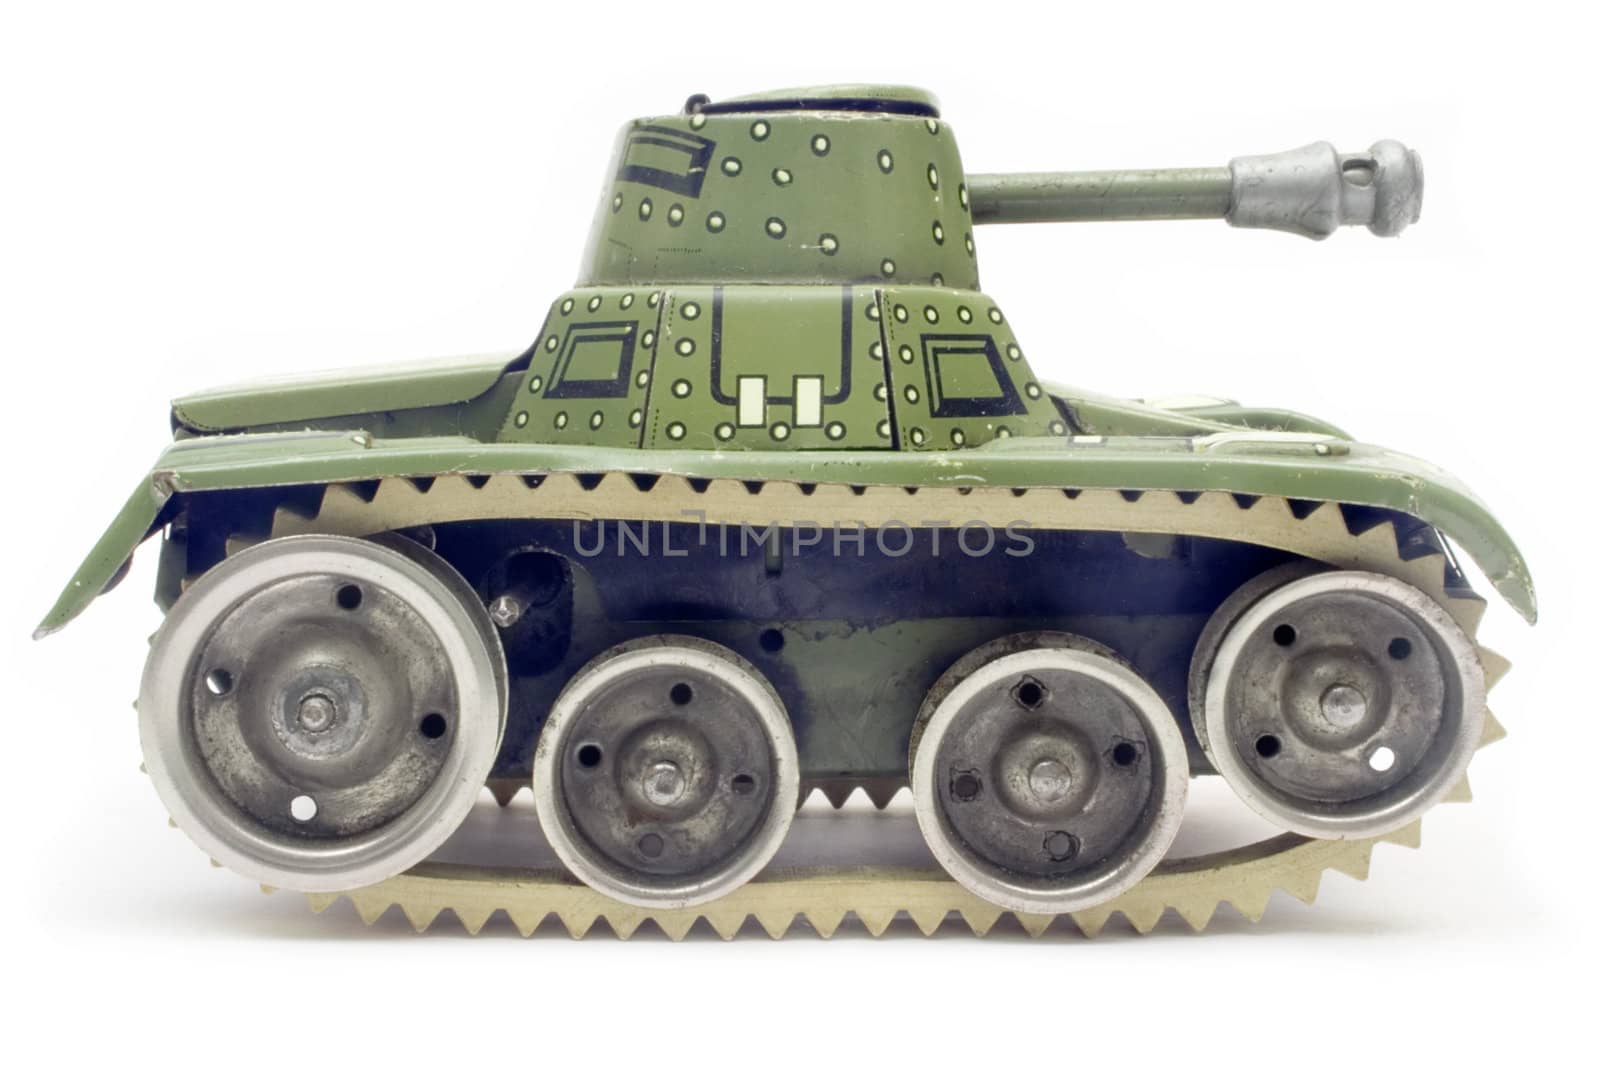 Antique tank model isolated on white.